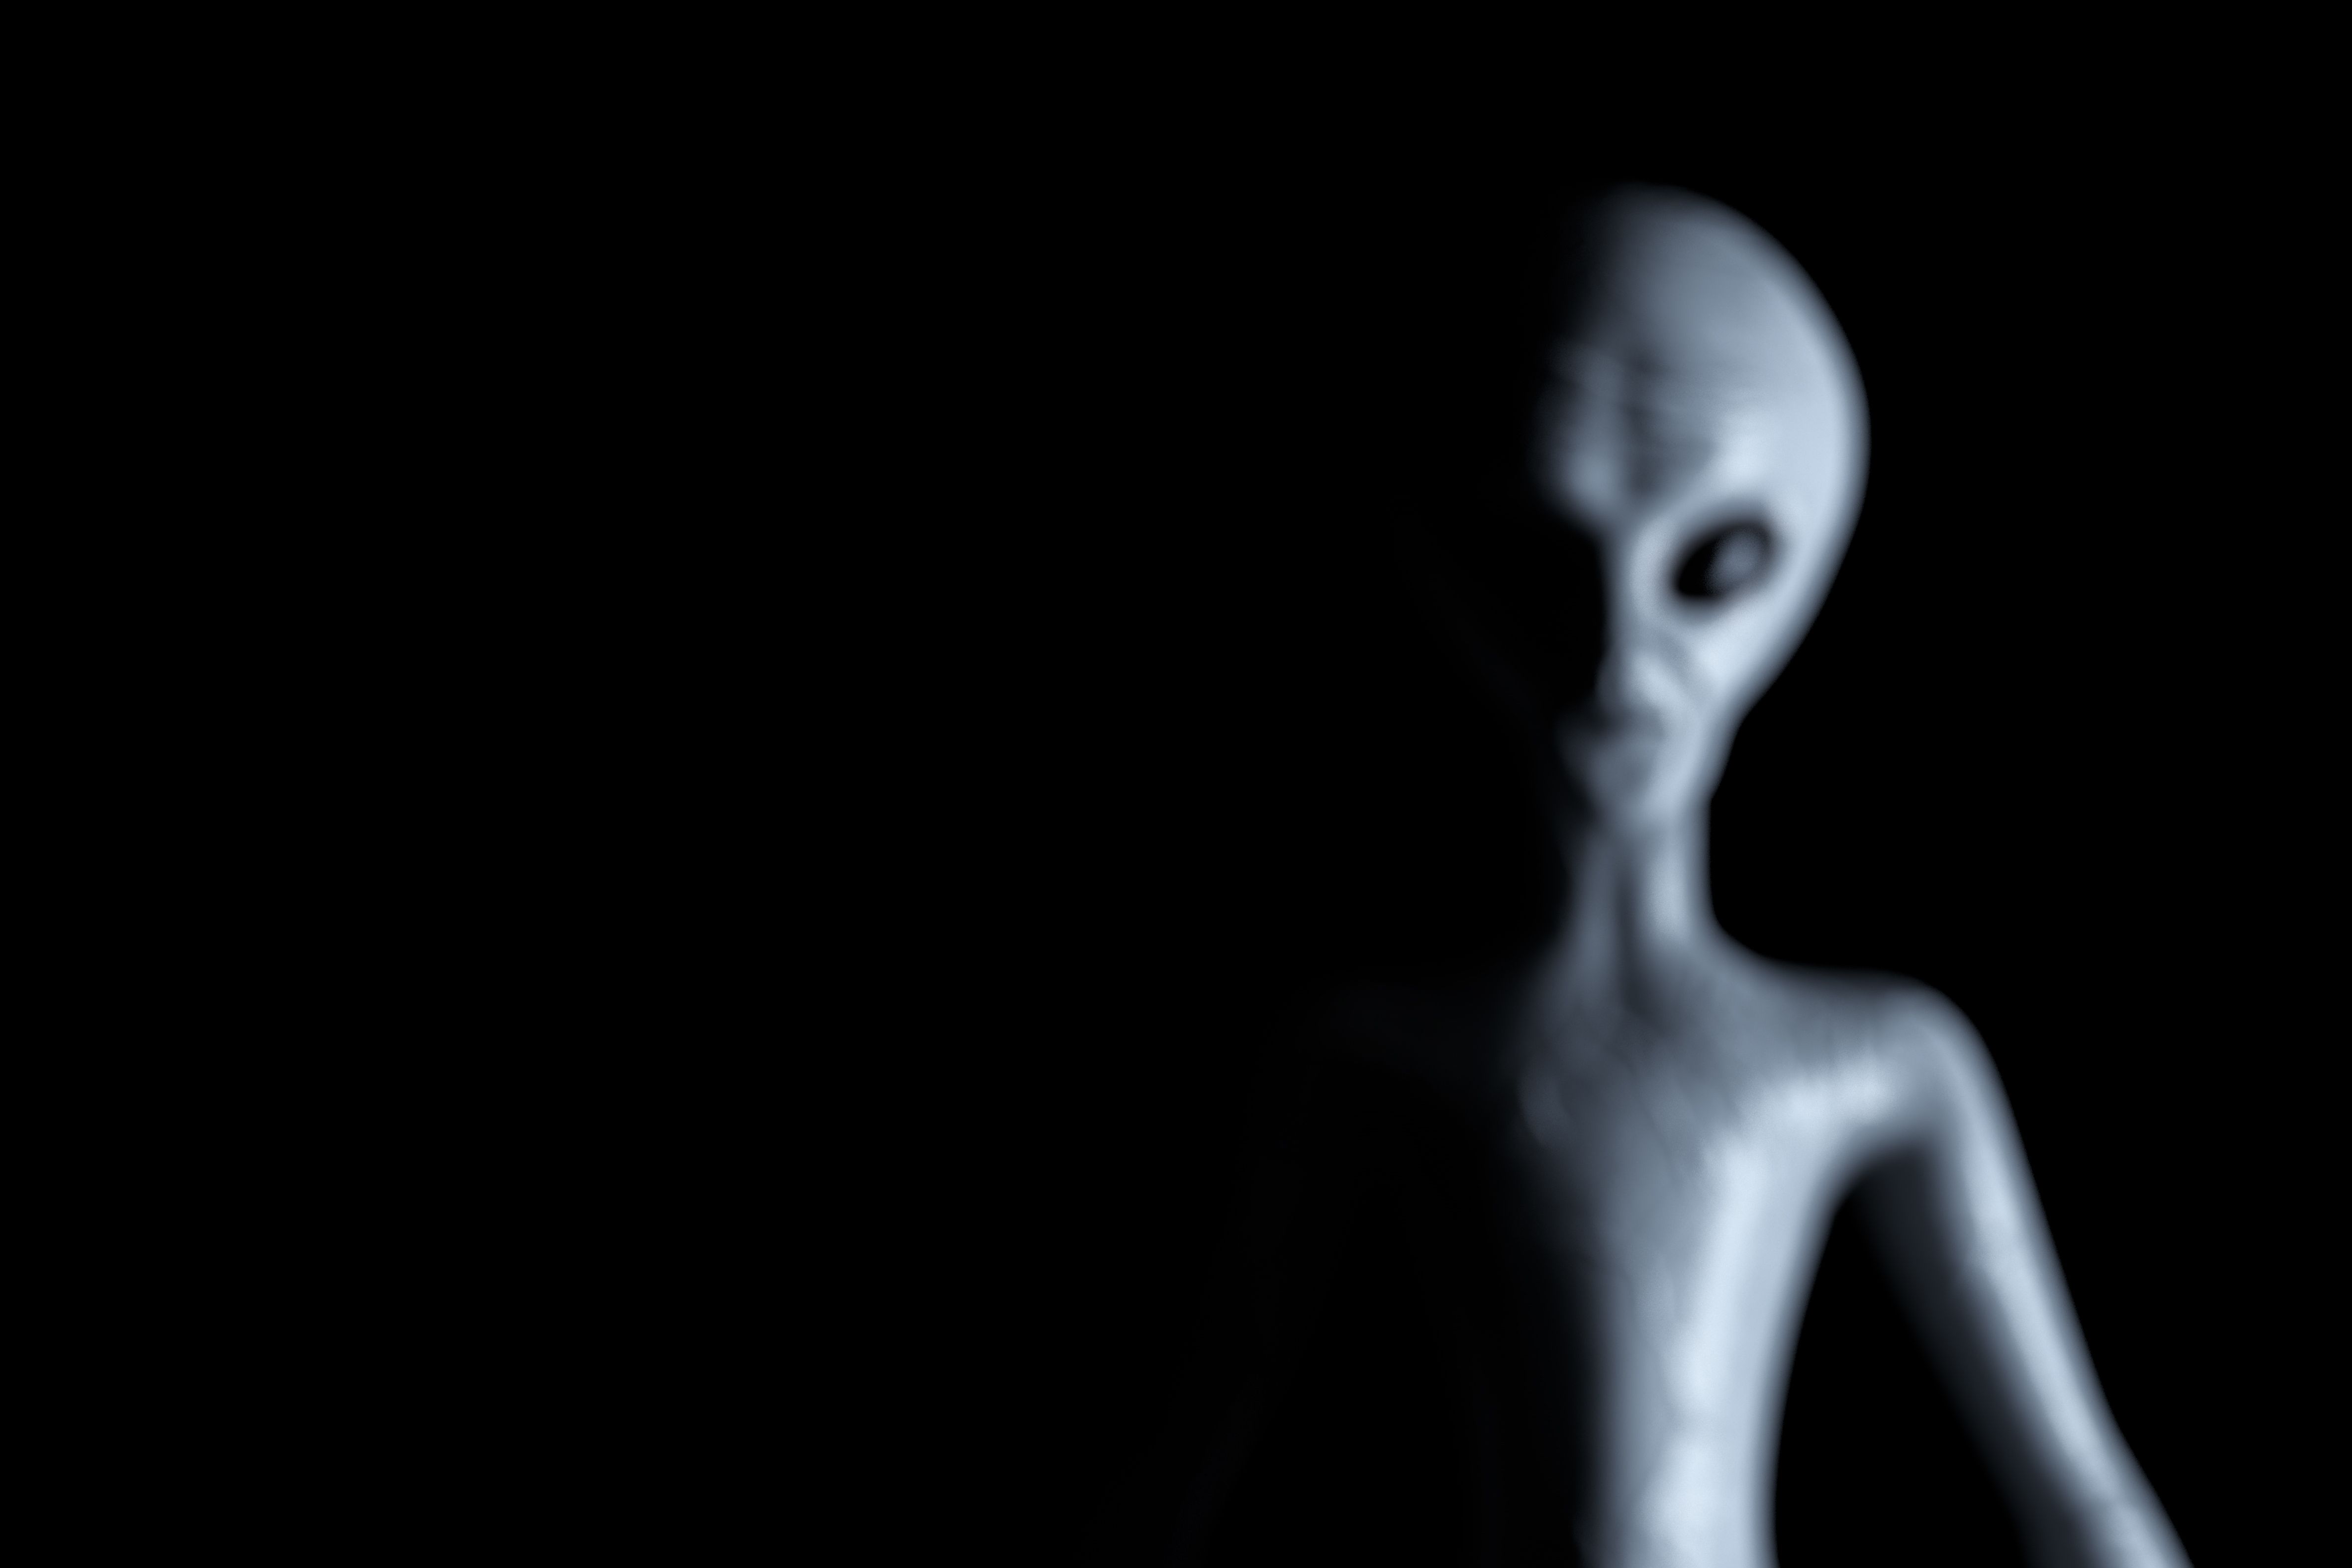 What Do Aliens Look Like? - Experts Reveal What Aliens Look Like